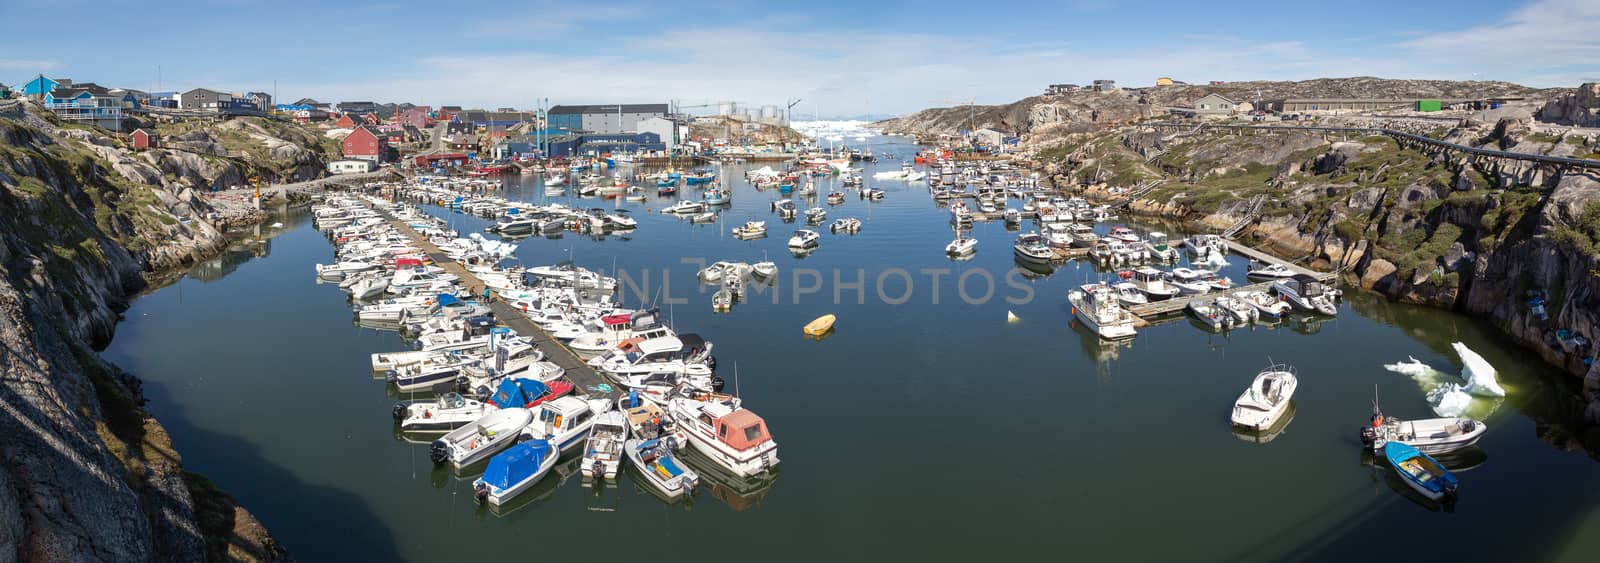 Ilulissat, Greenland - July 03, 2018: Panoramic view of the harbor in Ilulissat